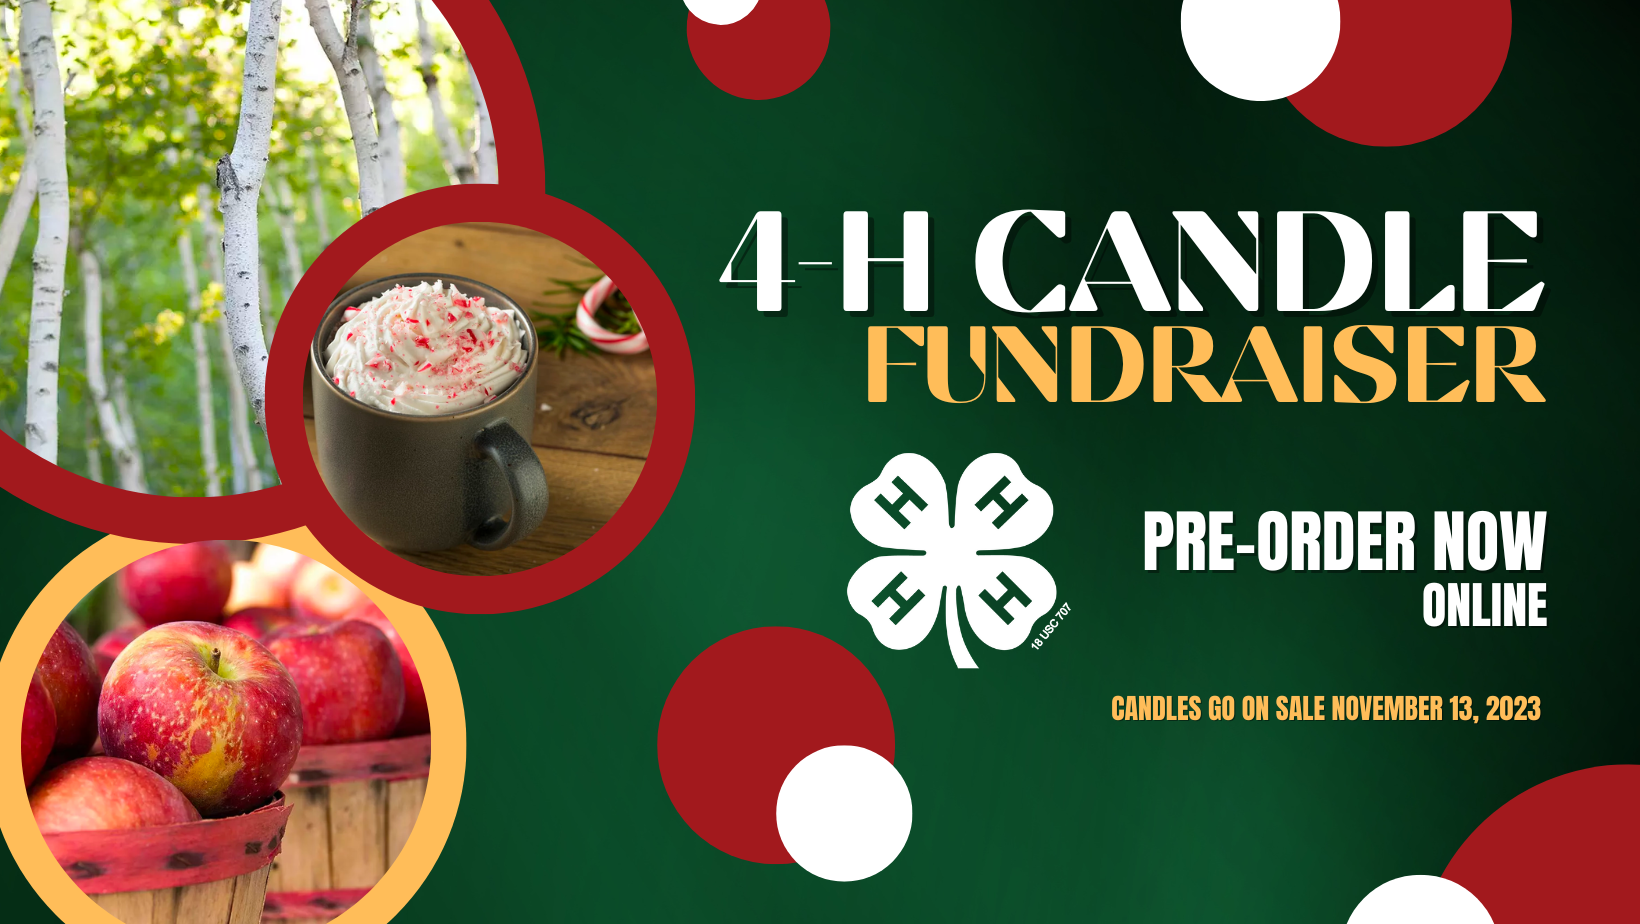 4-H Candle Fundraiser - Preorder now online